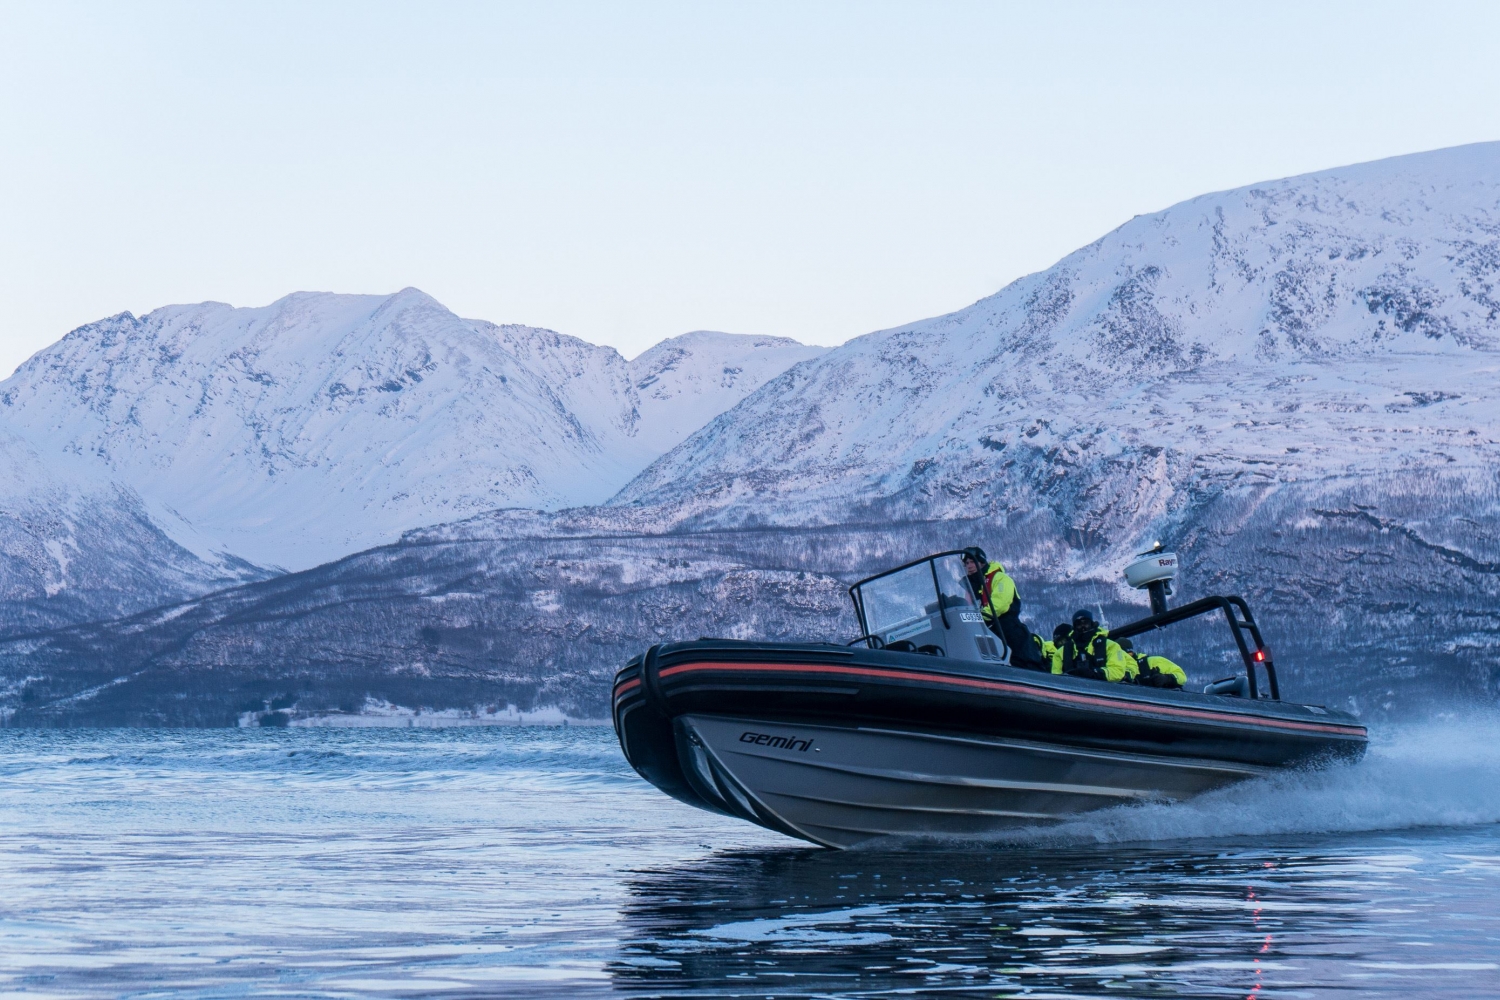 RIB Boat in fjord with snowcovered mountains behind